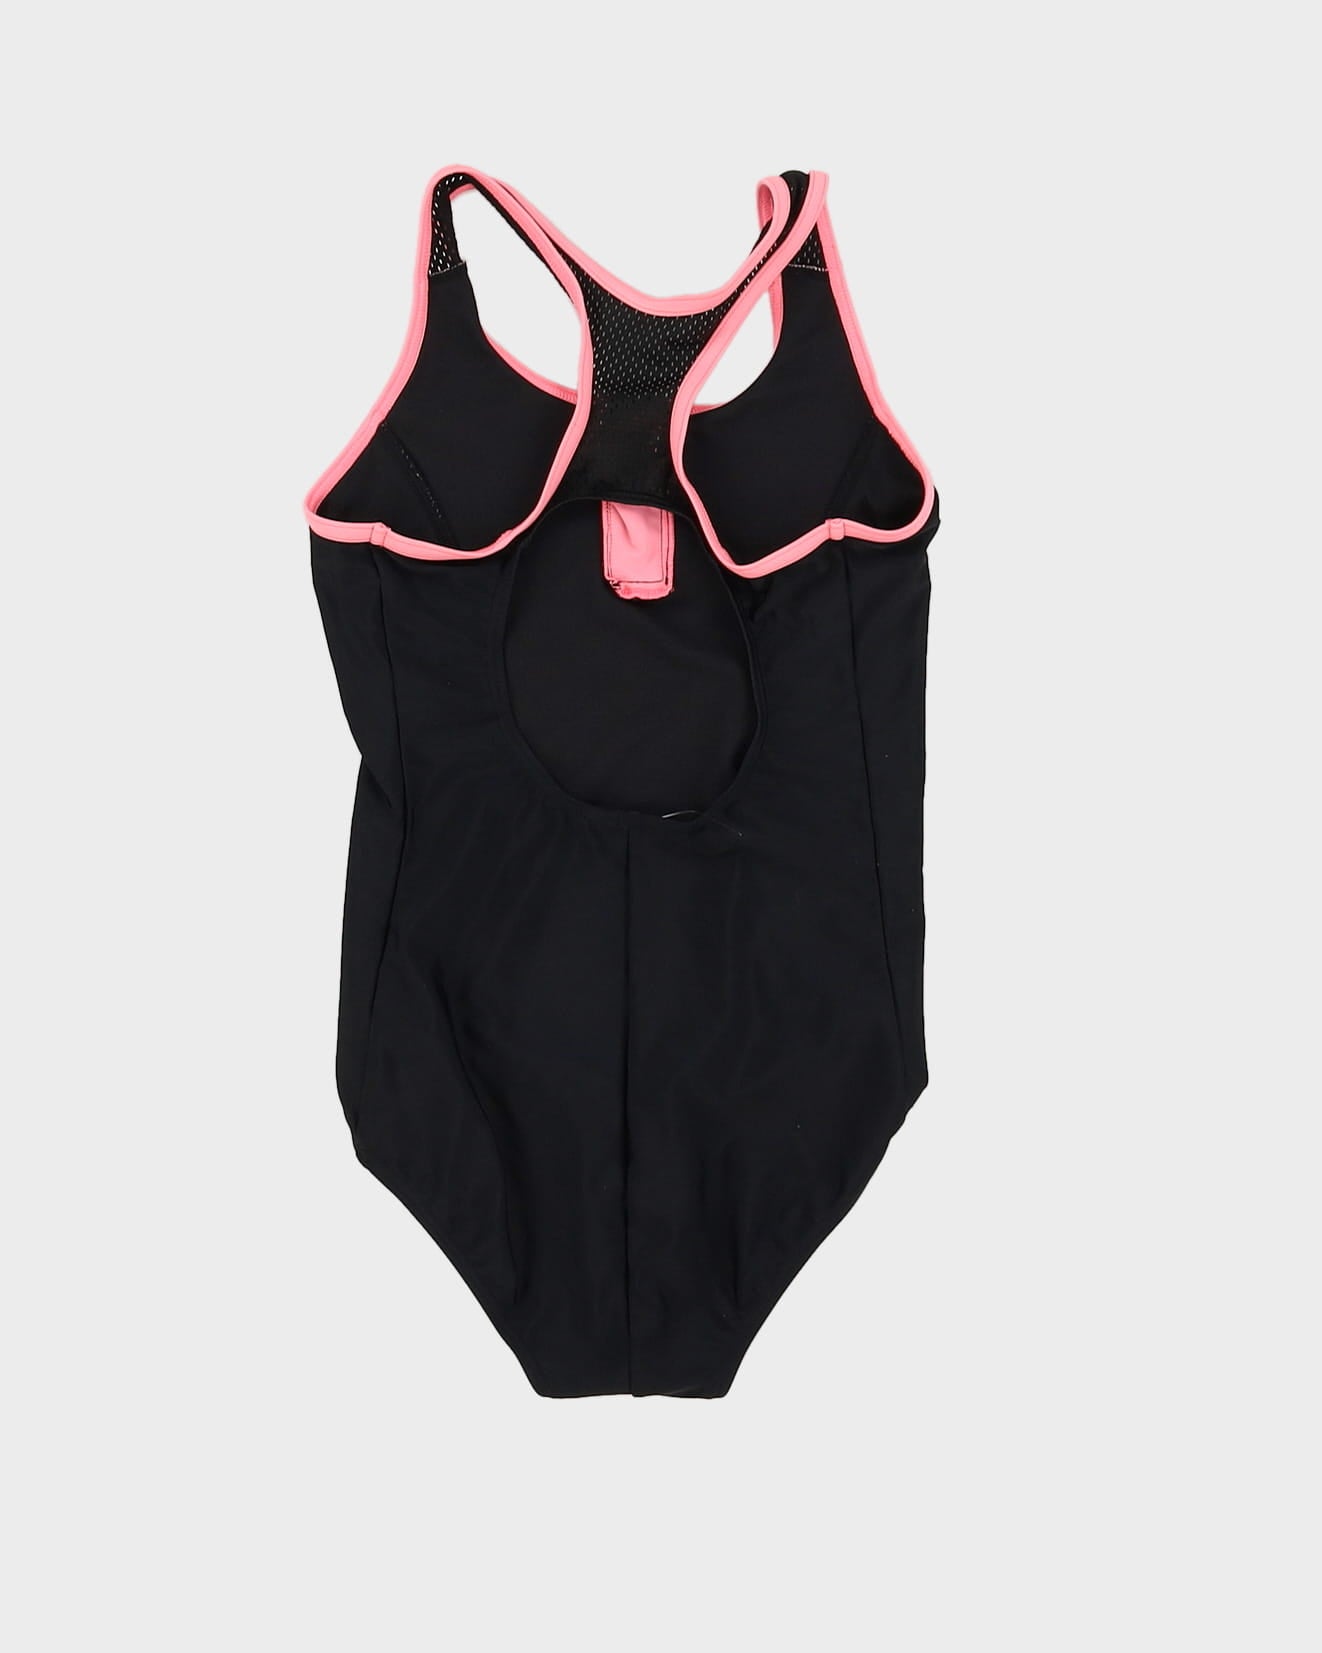 00s Y2K Black And Pink Patterned Swimsuit - XS